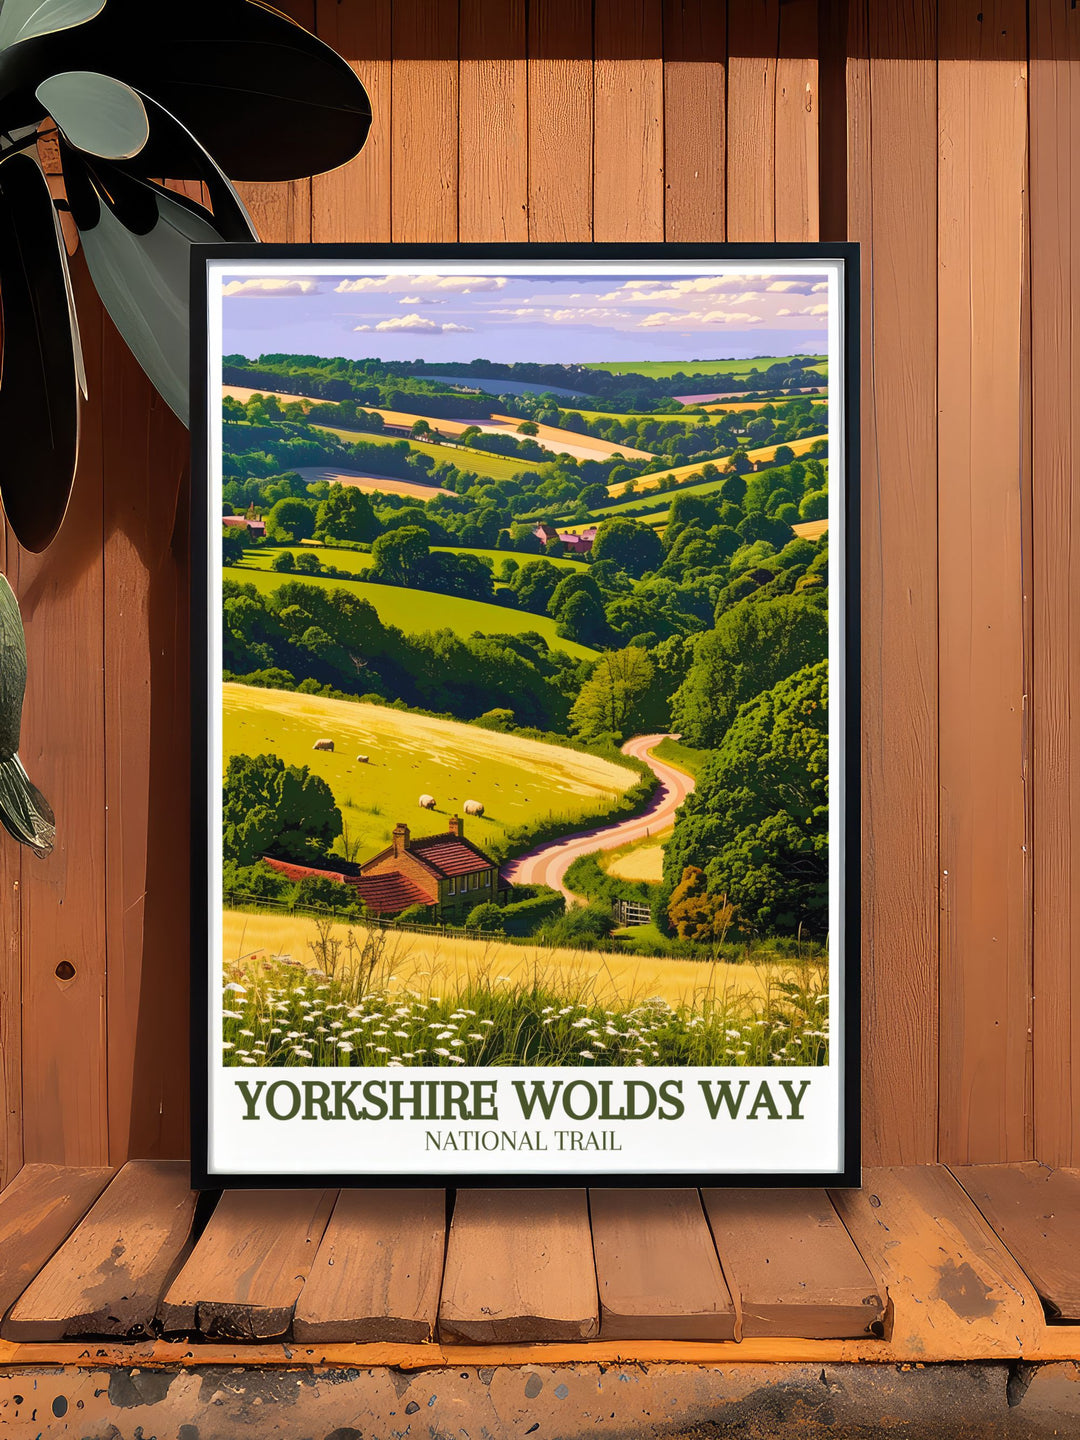 Framed art featuring the picturesque landscapes of the Yorkshire Wolds Way. Ideal for adding a sense of natural beauty and tranquility to your living space, celebrating the serene and inviting atmosphere of this national trail in the UK.